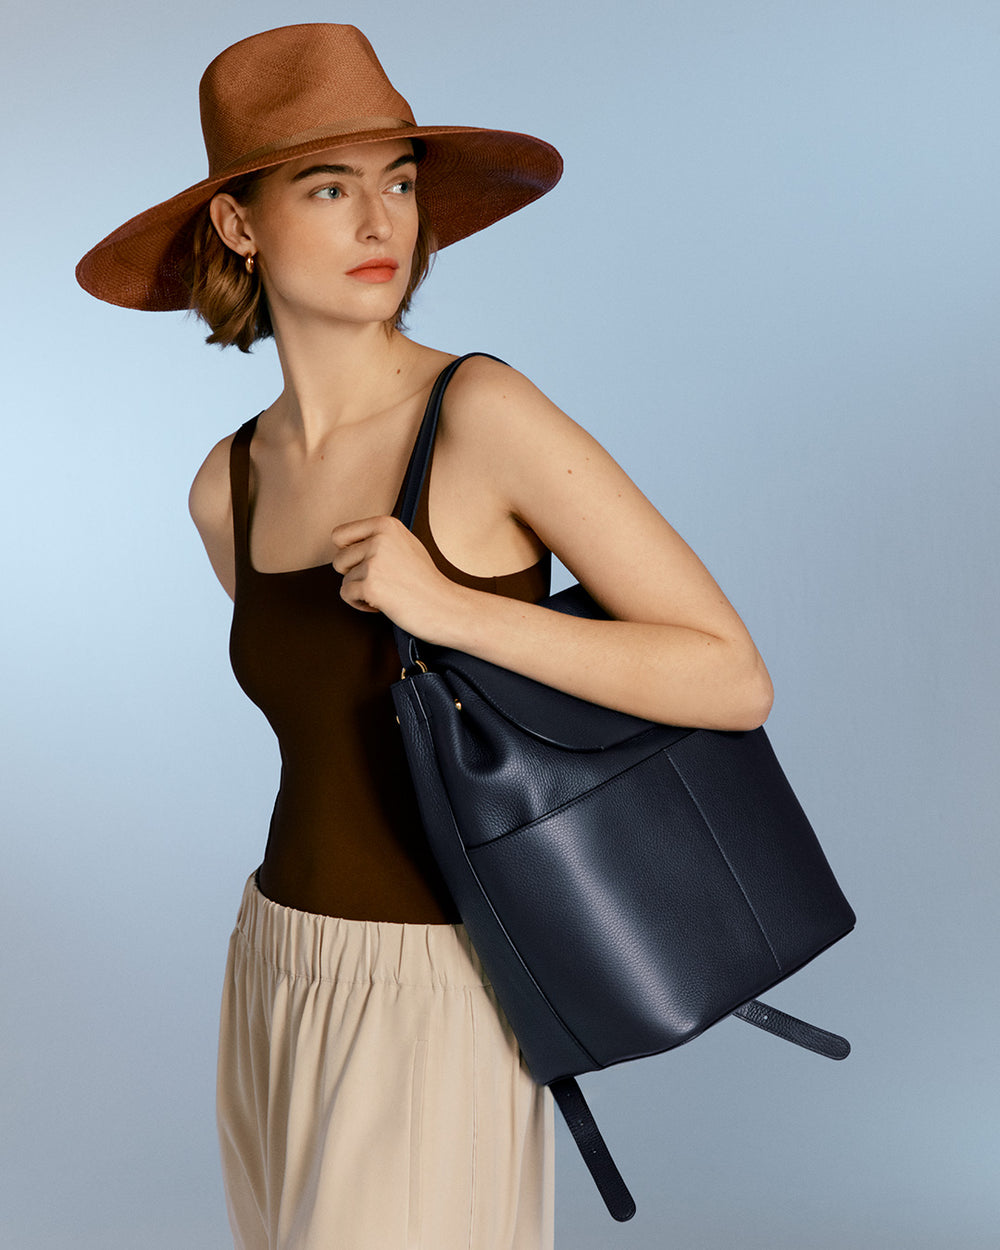 Woman wearing a hat and tank top, carrying a shoulder bag, looking to the side.